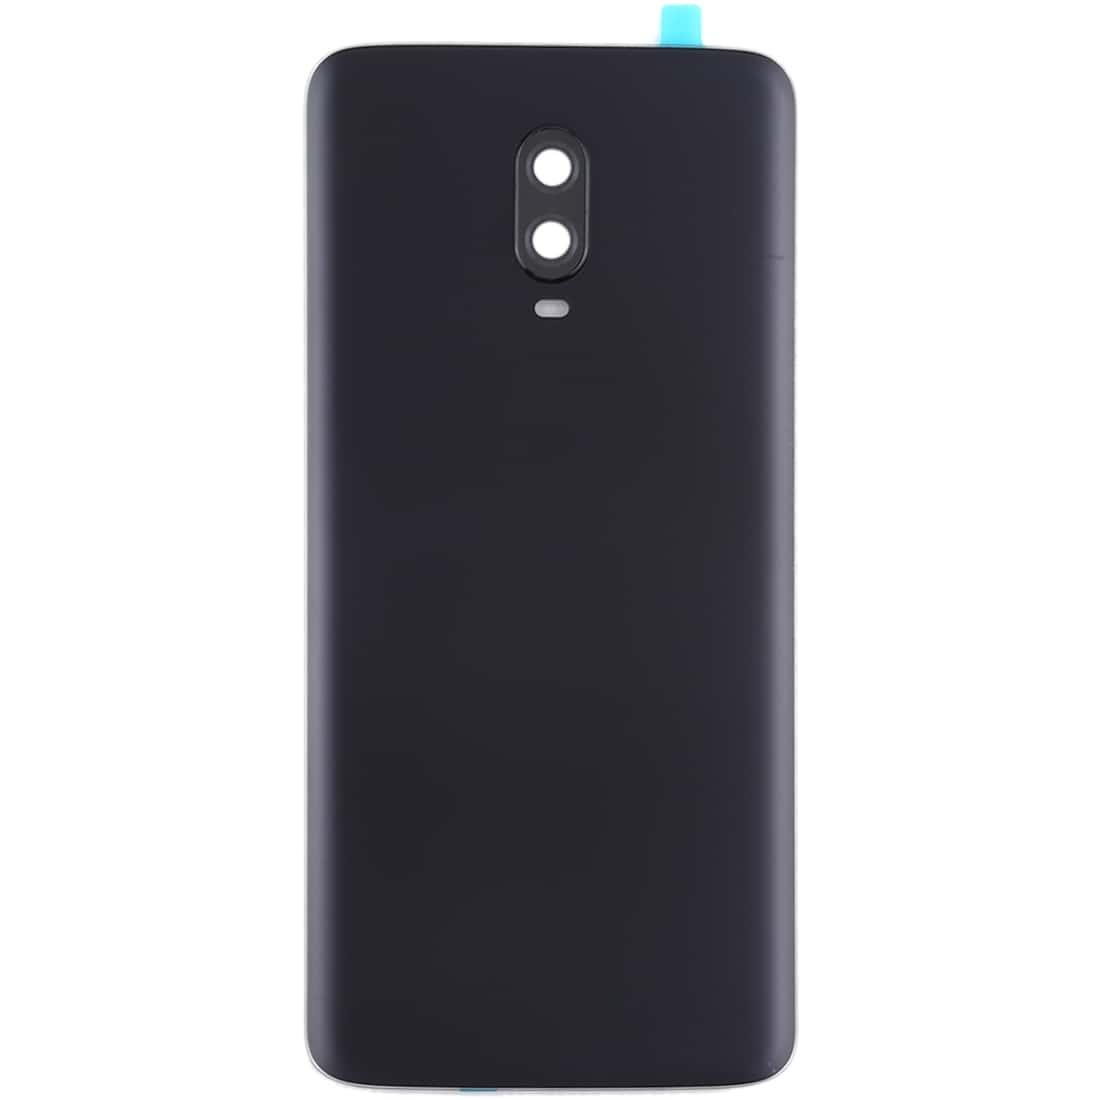 Back Glass Panel for Oneplus 6T Frosted Black  with Camera Lens